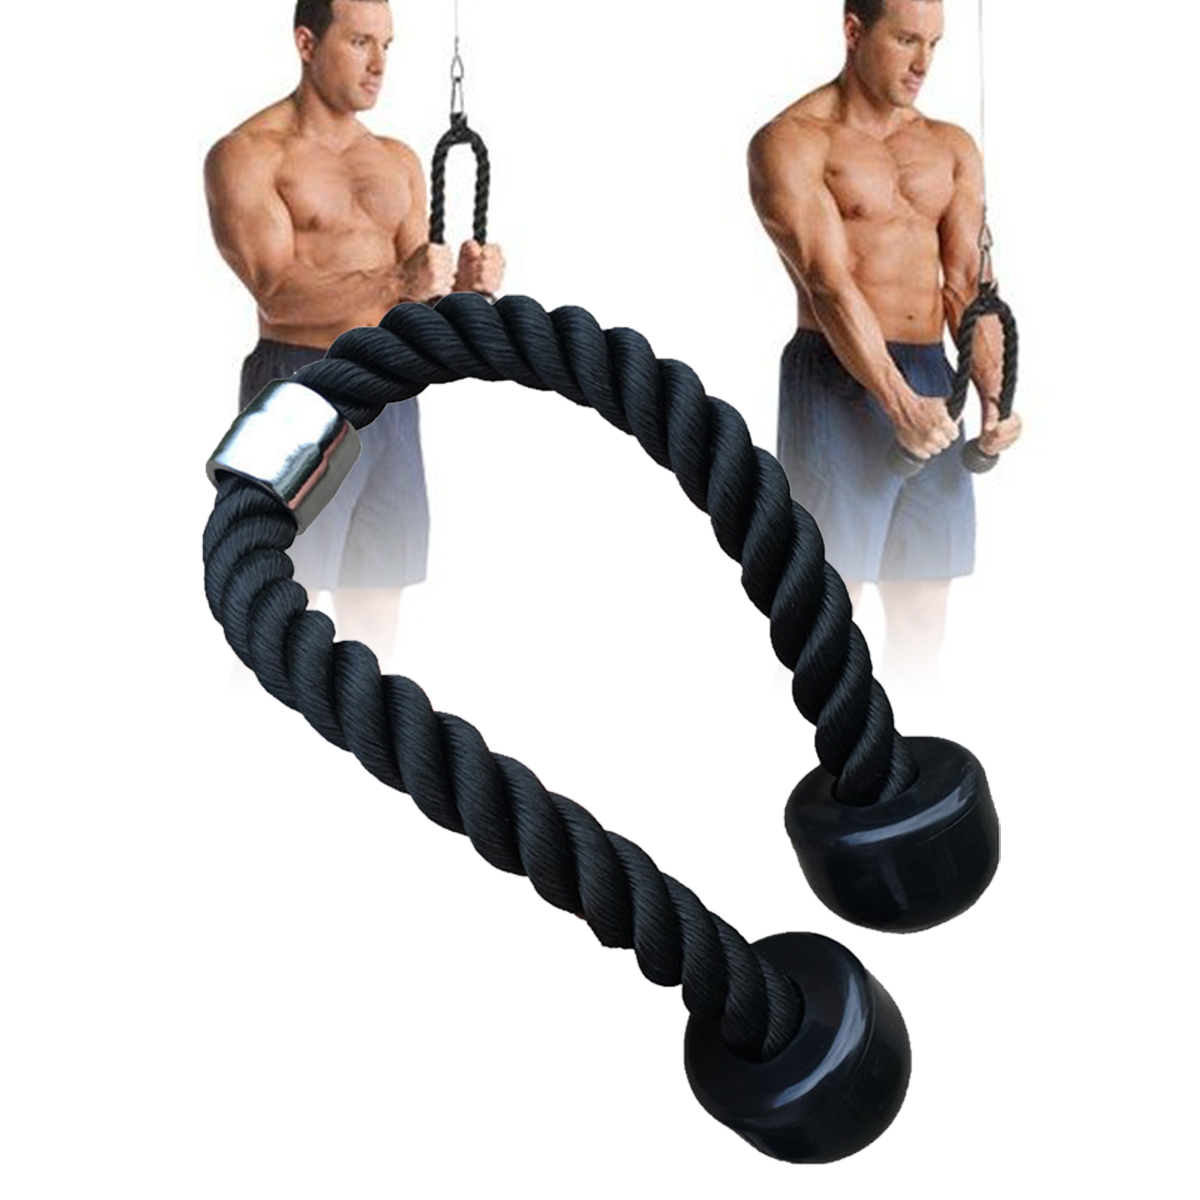 7PCSSET-Tricep-Bicep-Pull-Rope-Cable-Muscle-Strength-Training-Attachment-Home-Gym-Exercise-1851395-5